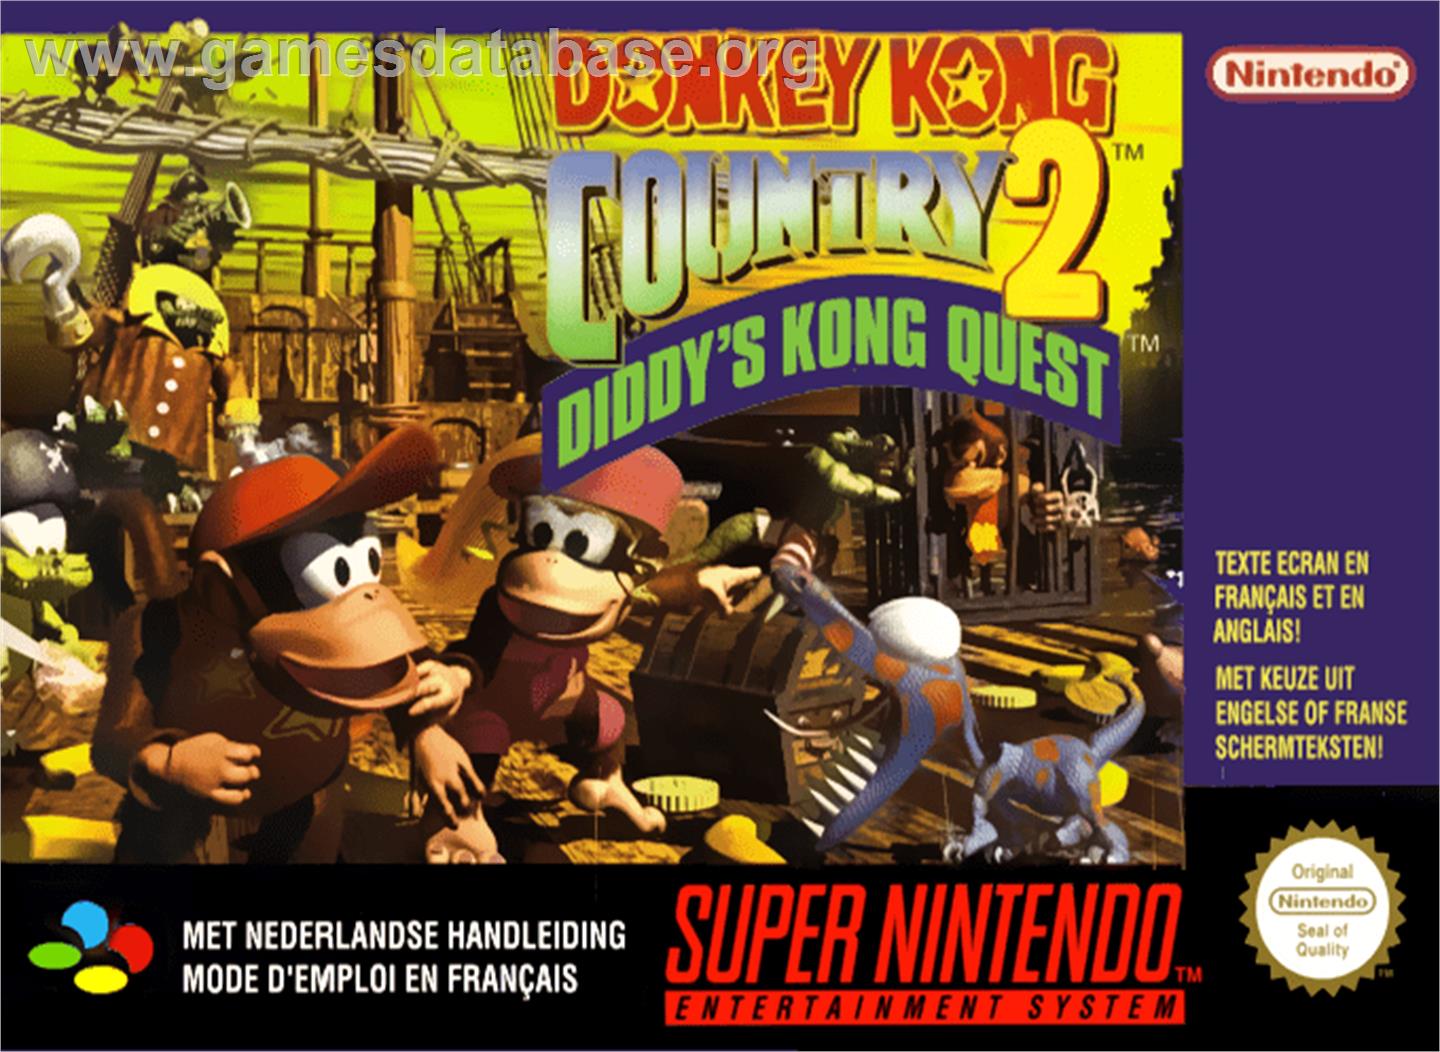 Donkey Kong Country 2: Diddy's Kong Quest - Nintendo SNES - Artwork - Box